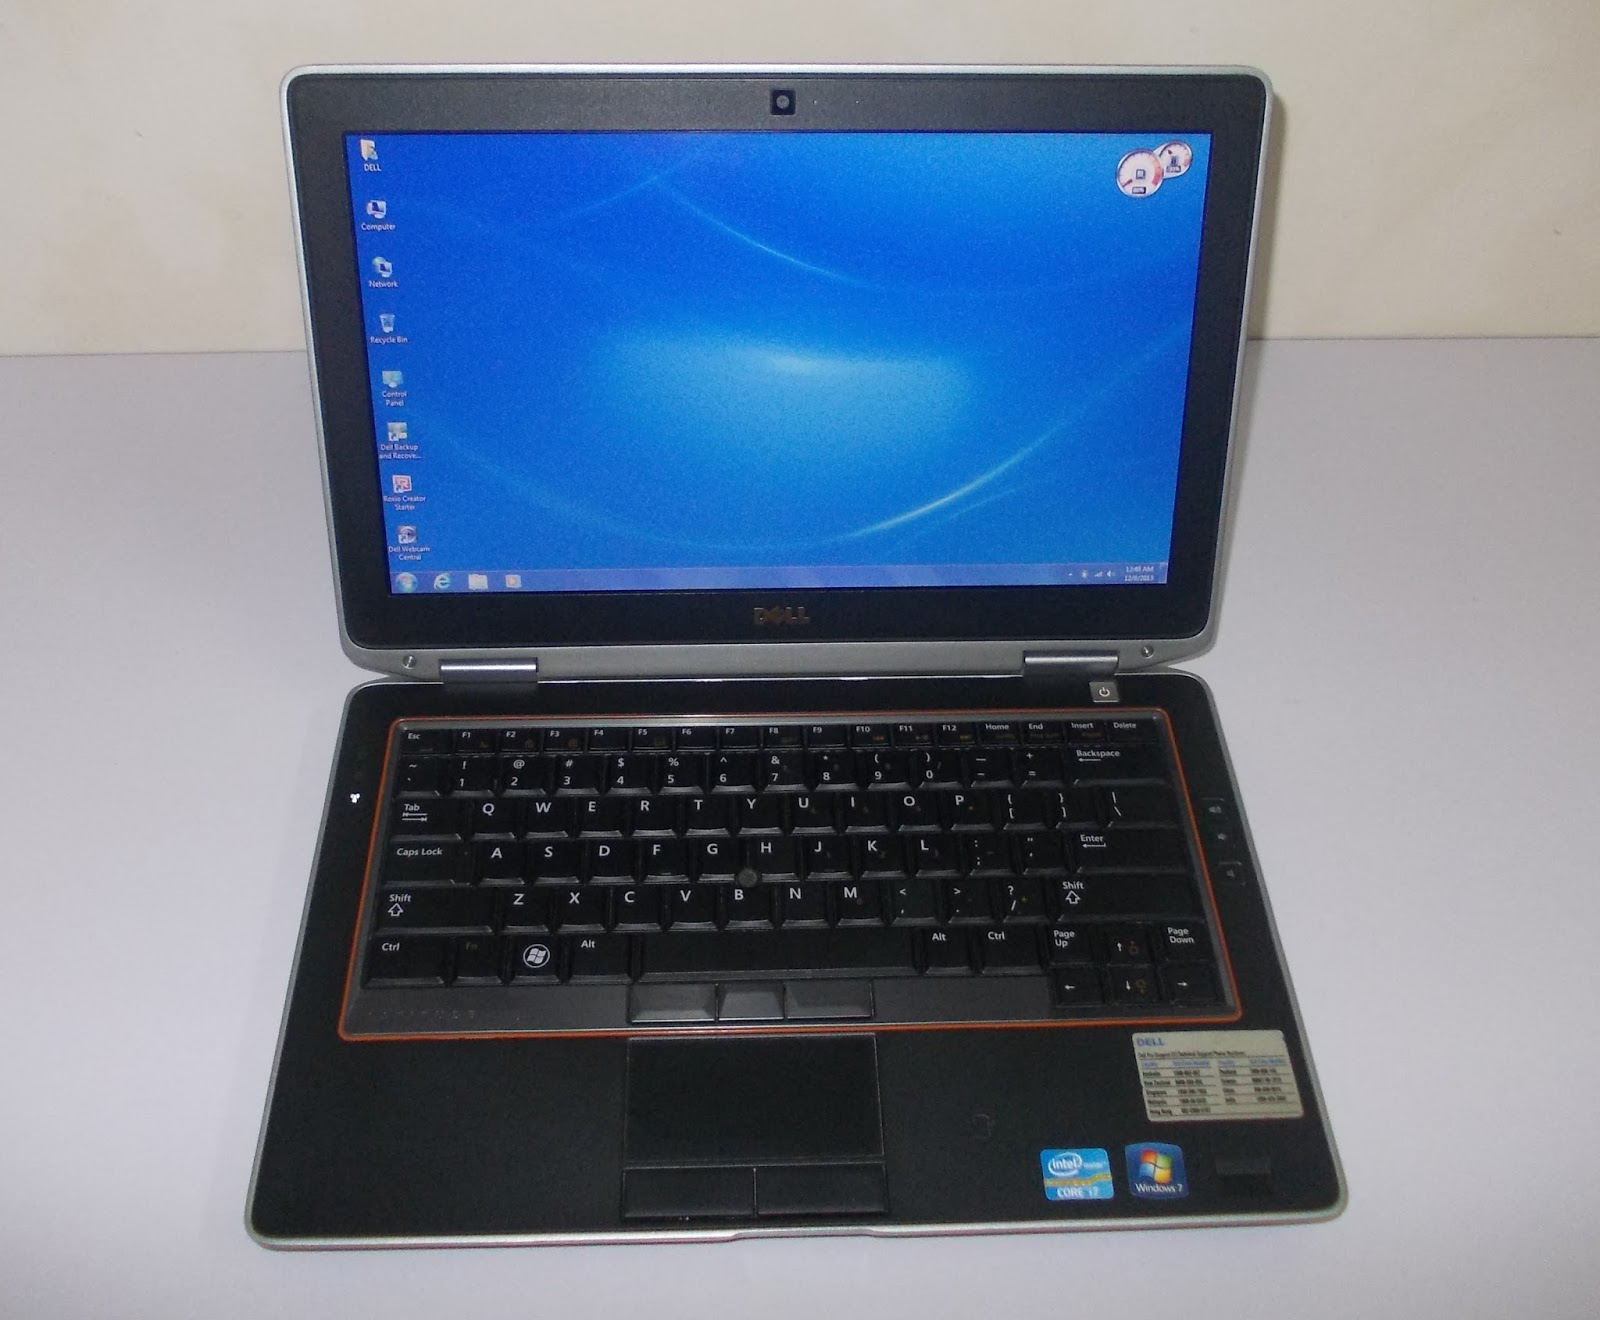 Used Dell Latitude E6320 Laptop i5 2.5GHz 4GB 320GB DVD 13.3" - image 2 of 5